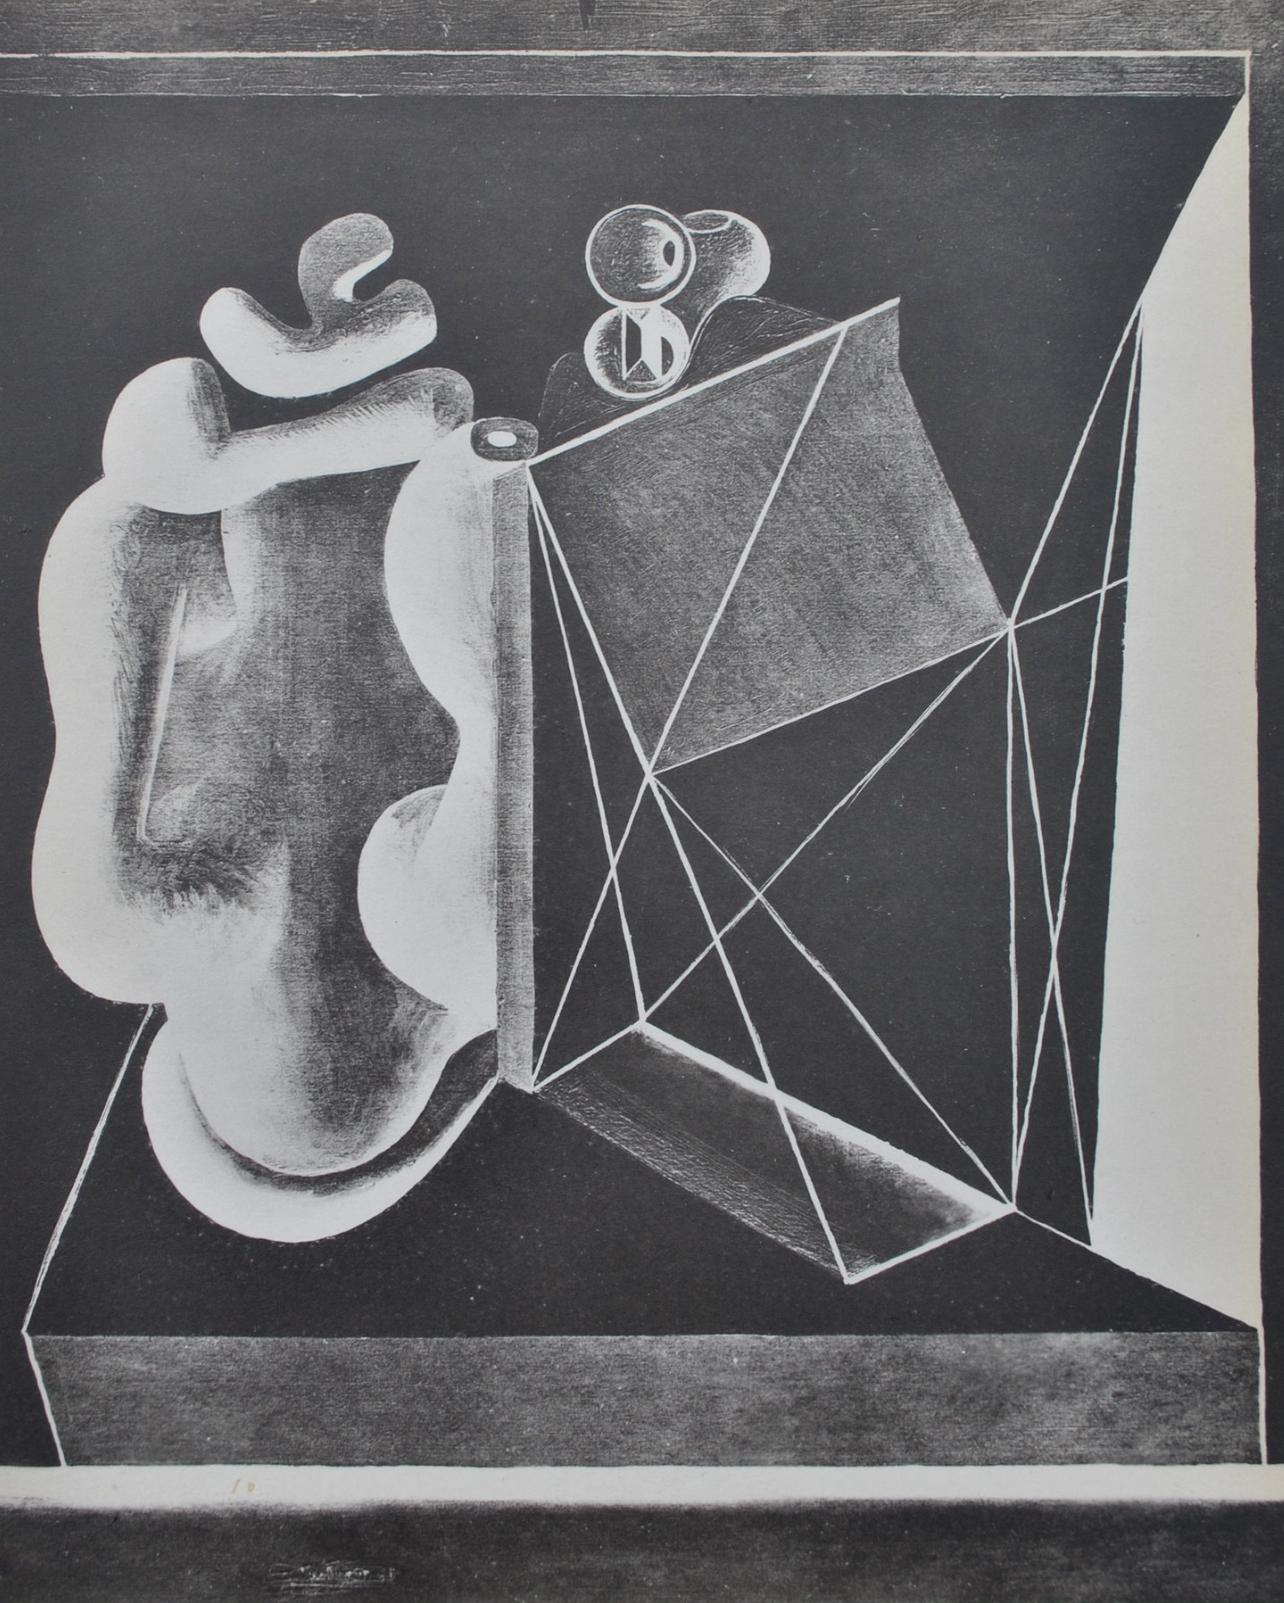 Lithograph on wove paper. Unsigned and unnumbered, as issued. Good Condition; never framed or matted. Notes: From the volume, Le Corbusier Œuvre Plastique, 1938. Published under the direction of Jean Badovici, Paris; printed by Éditions Albert